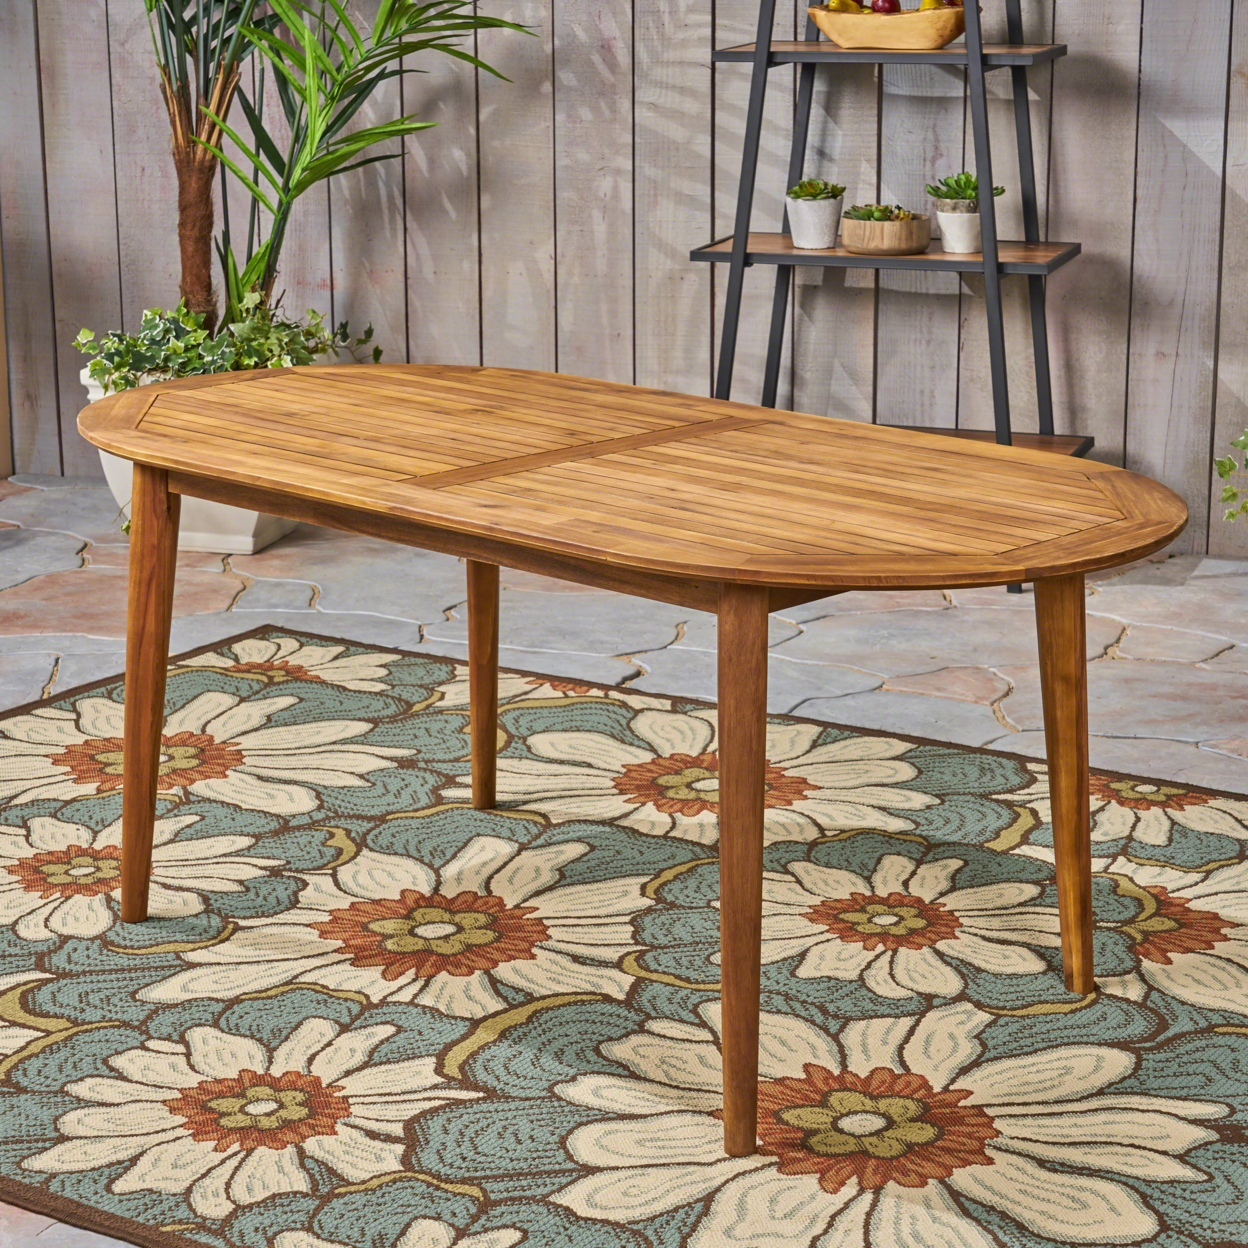 Stanford Outdoor Wood Oval Dining Table - Teak